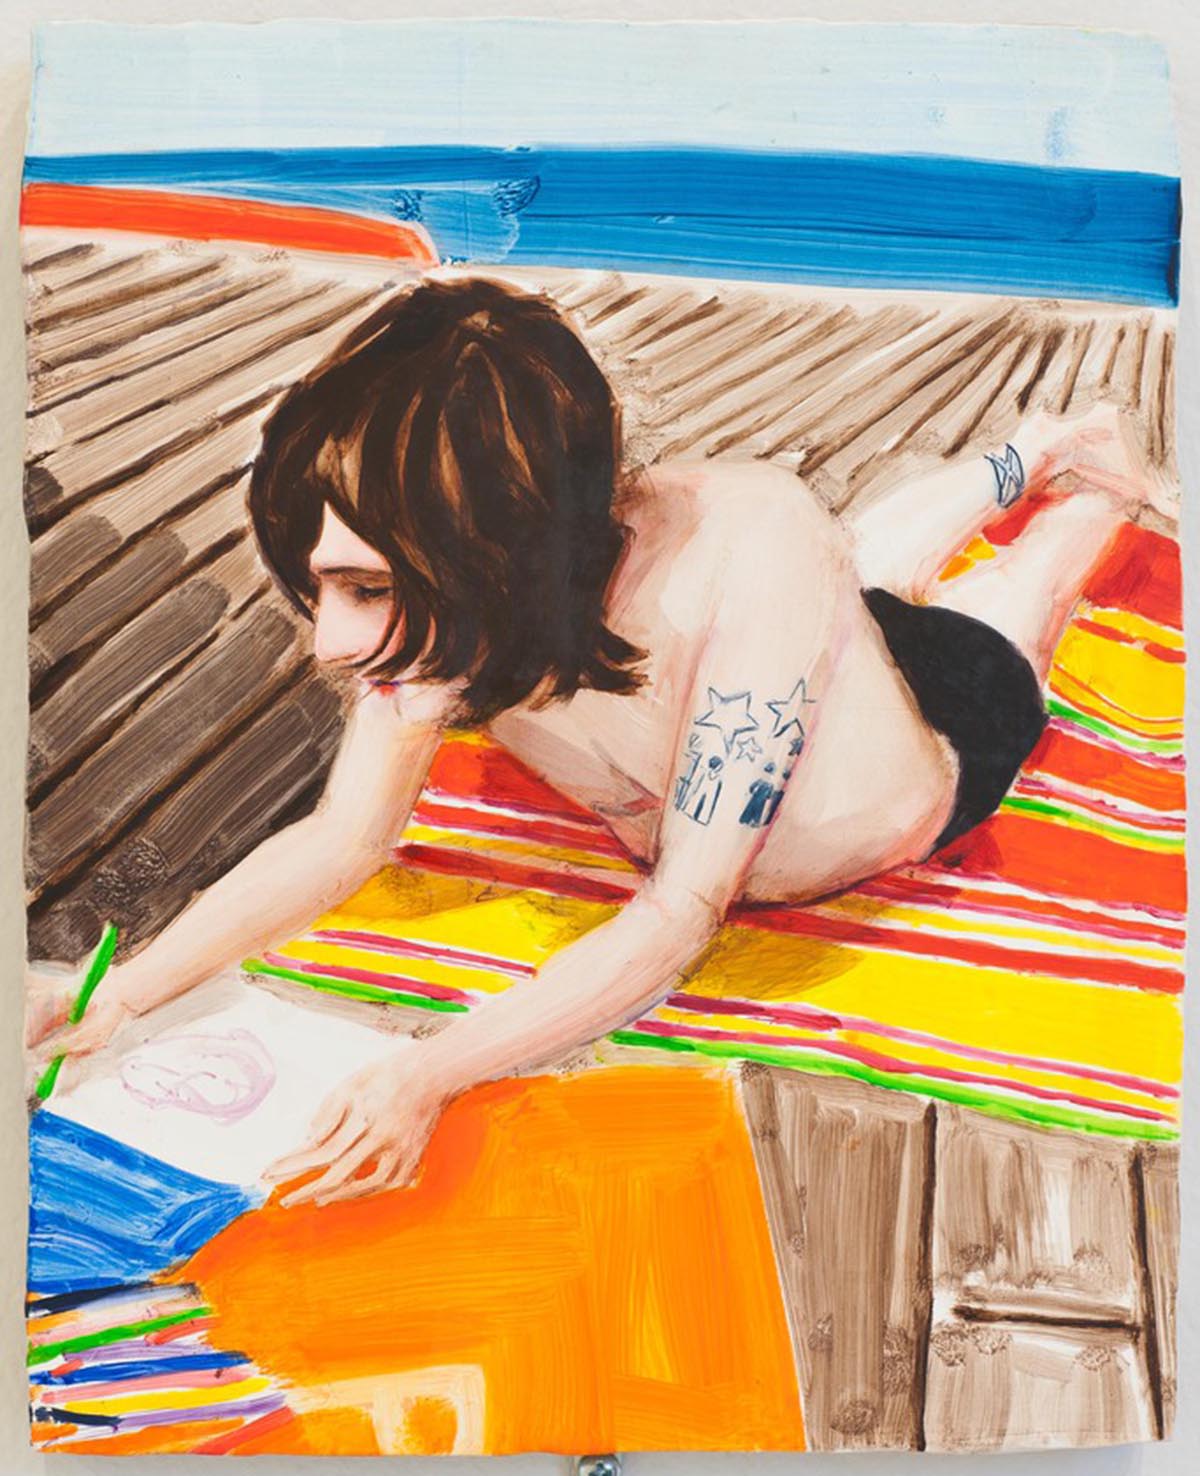 A young man wearing swim trunks lays on his stomach on a beach towel on a wooden boardwalk, drawing on a large piece of paper.